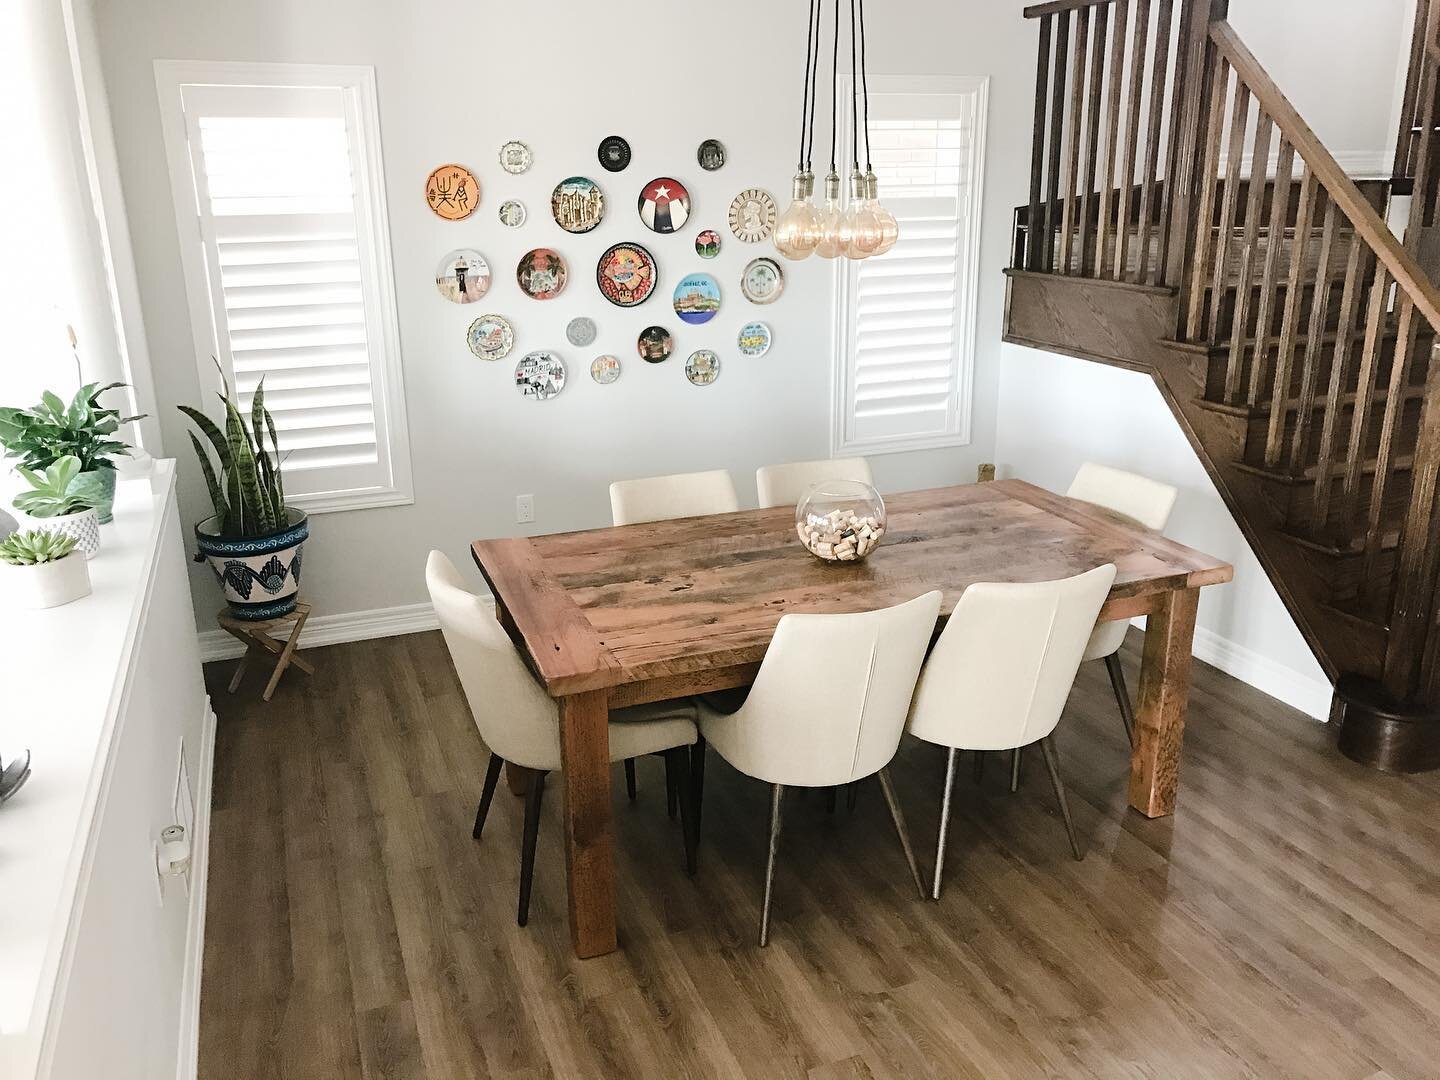 This dining table is a great mixture of rustic, cozy, and simple. It is made of reclaimed wood with a classic four post design. Modify this design by choosing a different wood type, and the style options are endless!

#customfurniture #customfurnitur